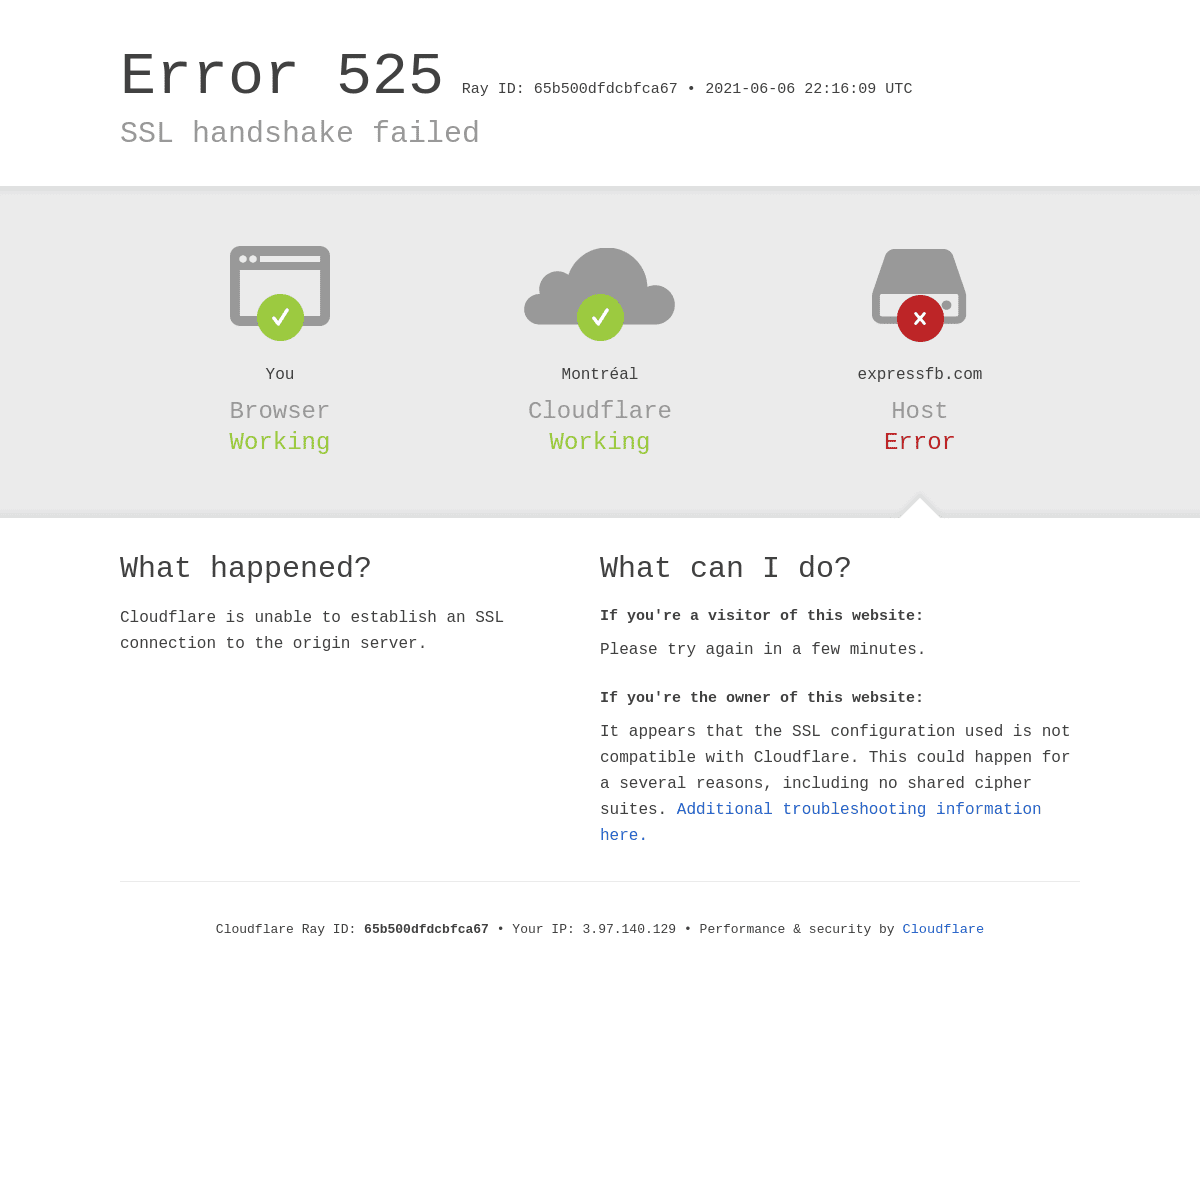 A complete backup of https://expressfb.com